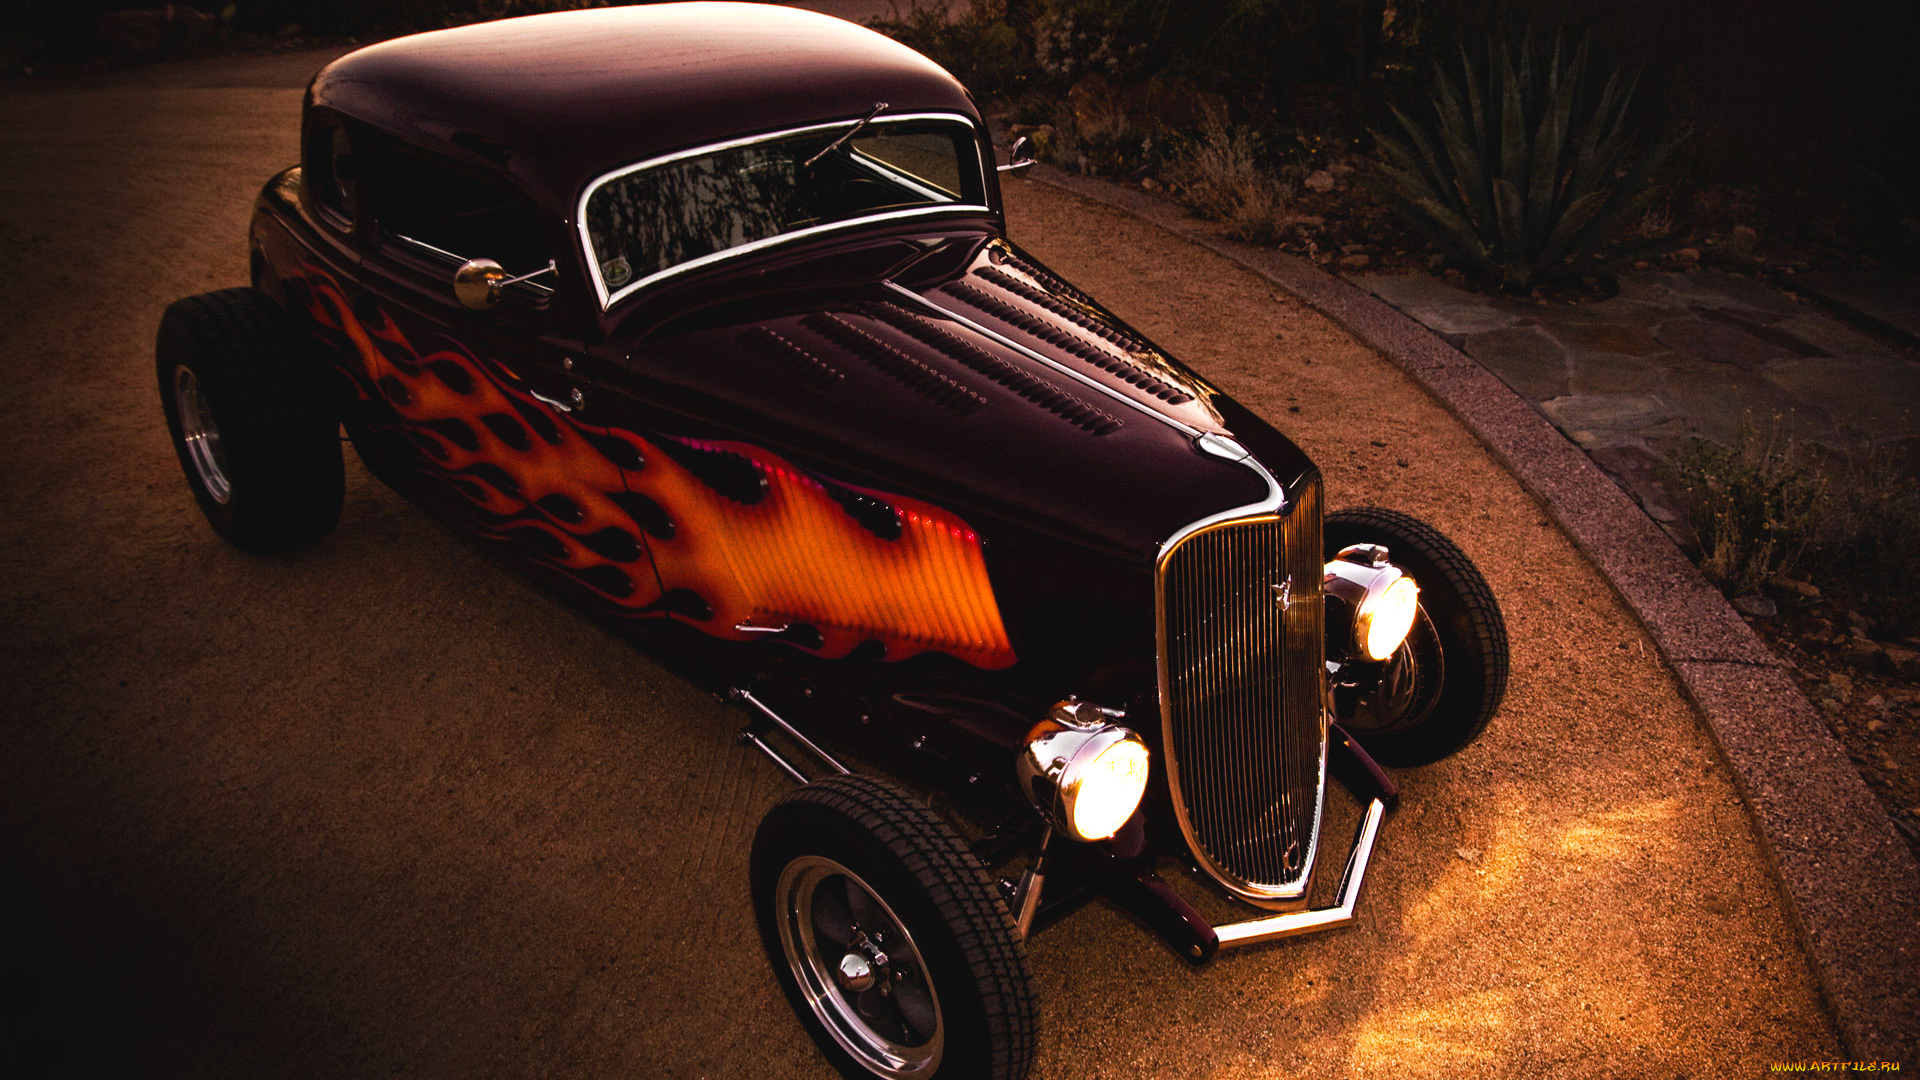 ford, coupe, 1933, hot-rod, автомобили, hotrod, dragster, хот-род, свет, ночь, купе, форд, 1933, hot-rod, coupe, ford, пламя